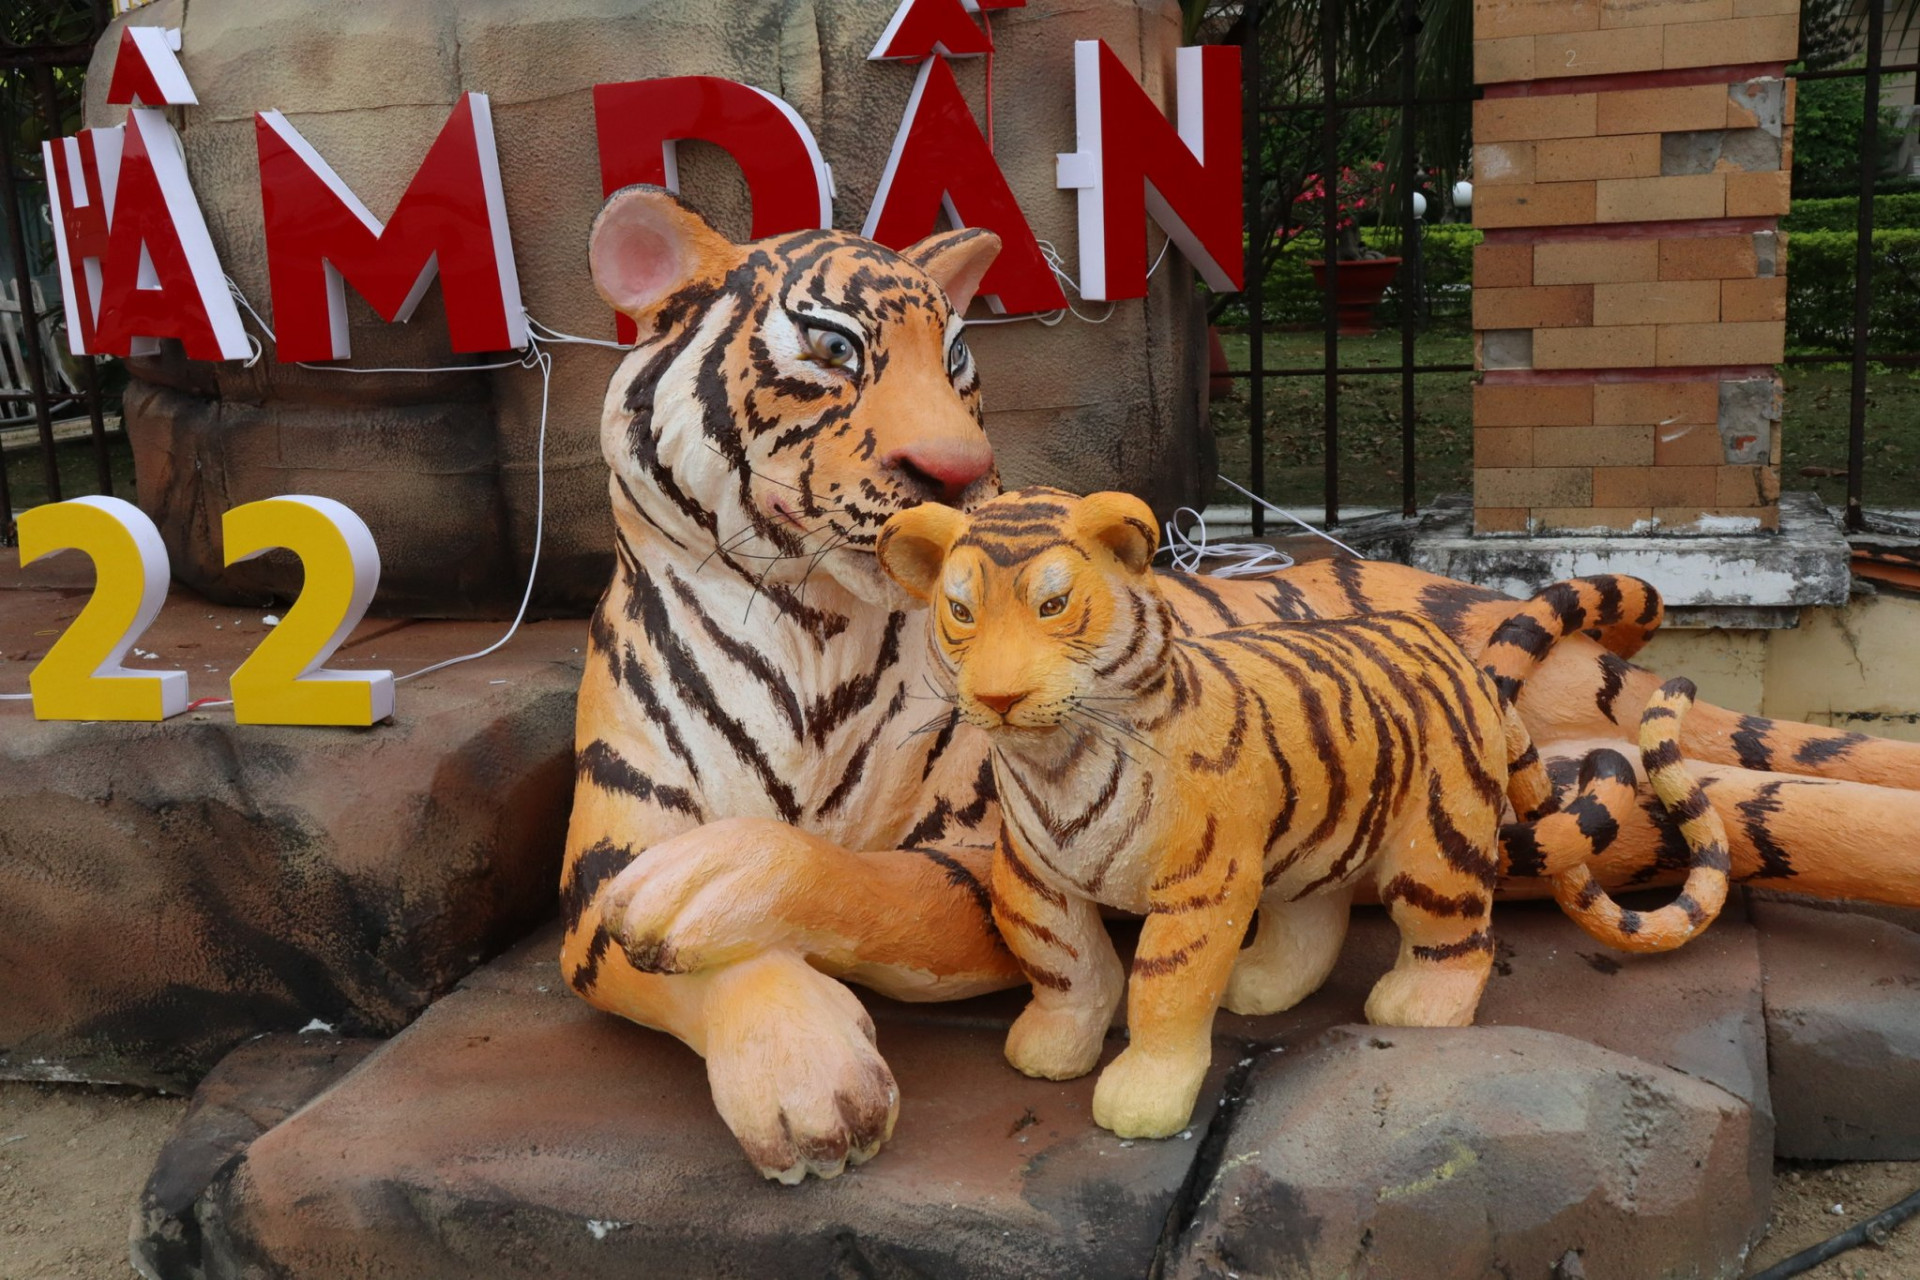 Statues of tiger mother and baby near 2-4 Square, Nha Trang